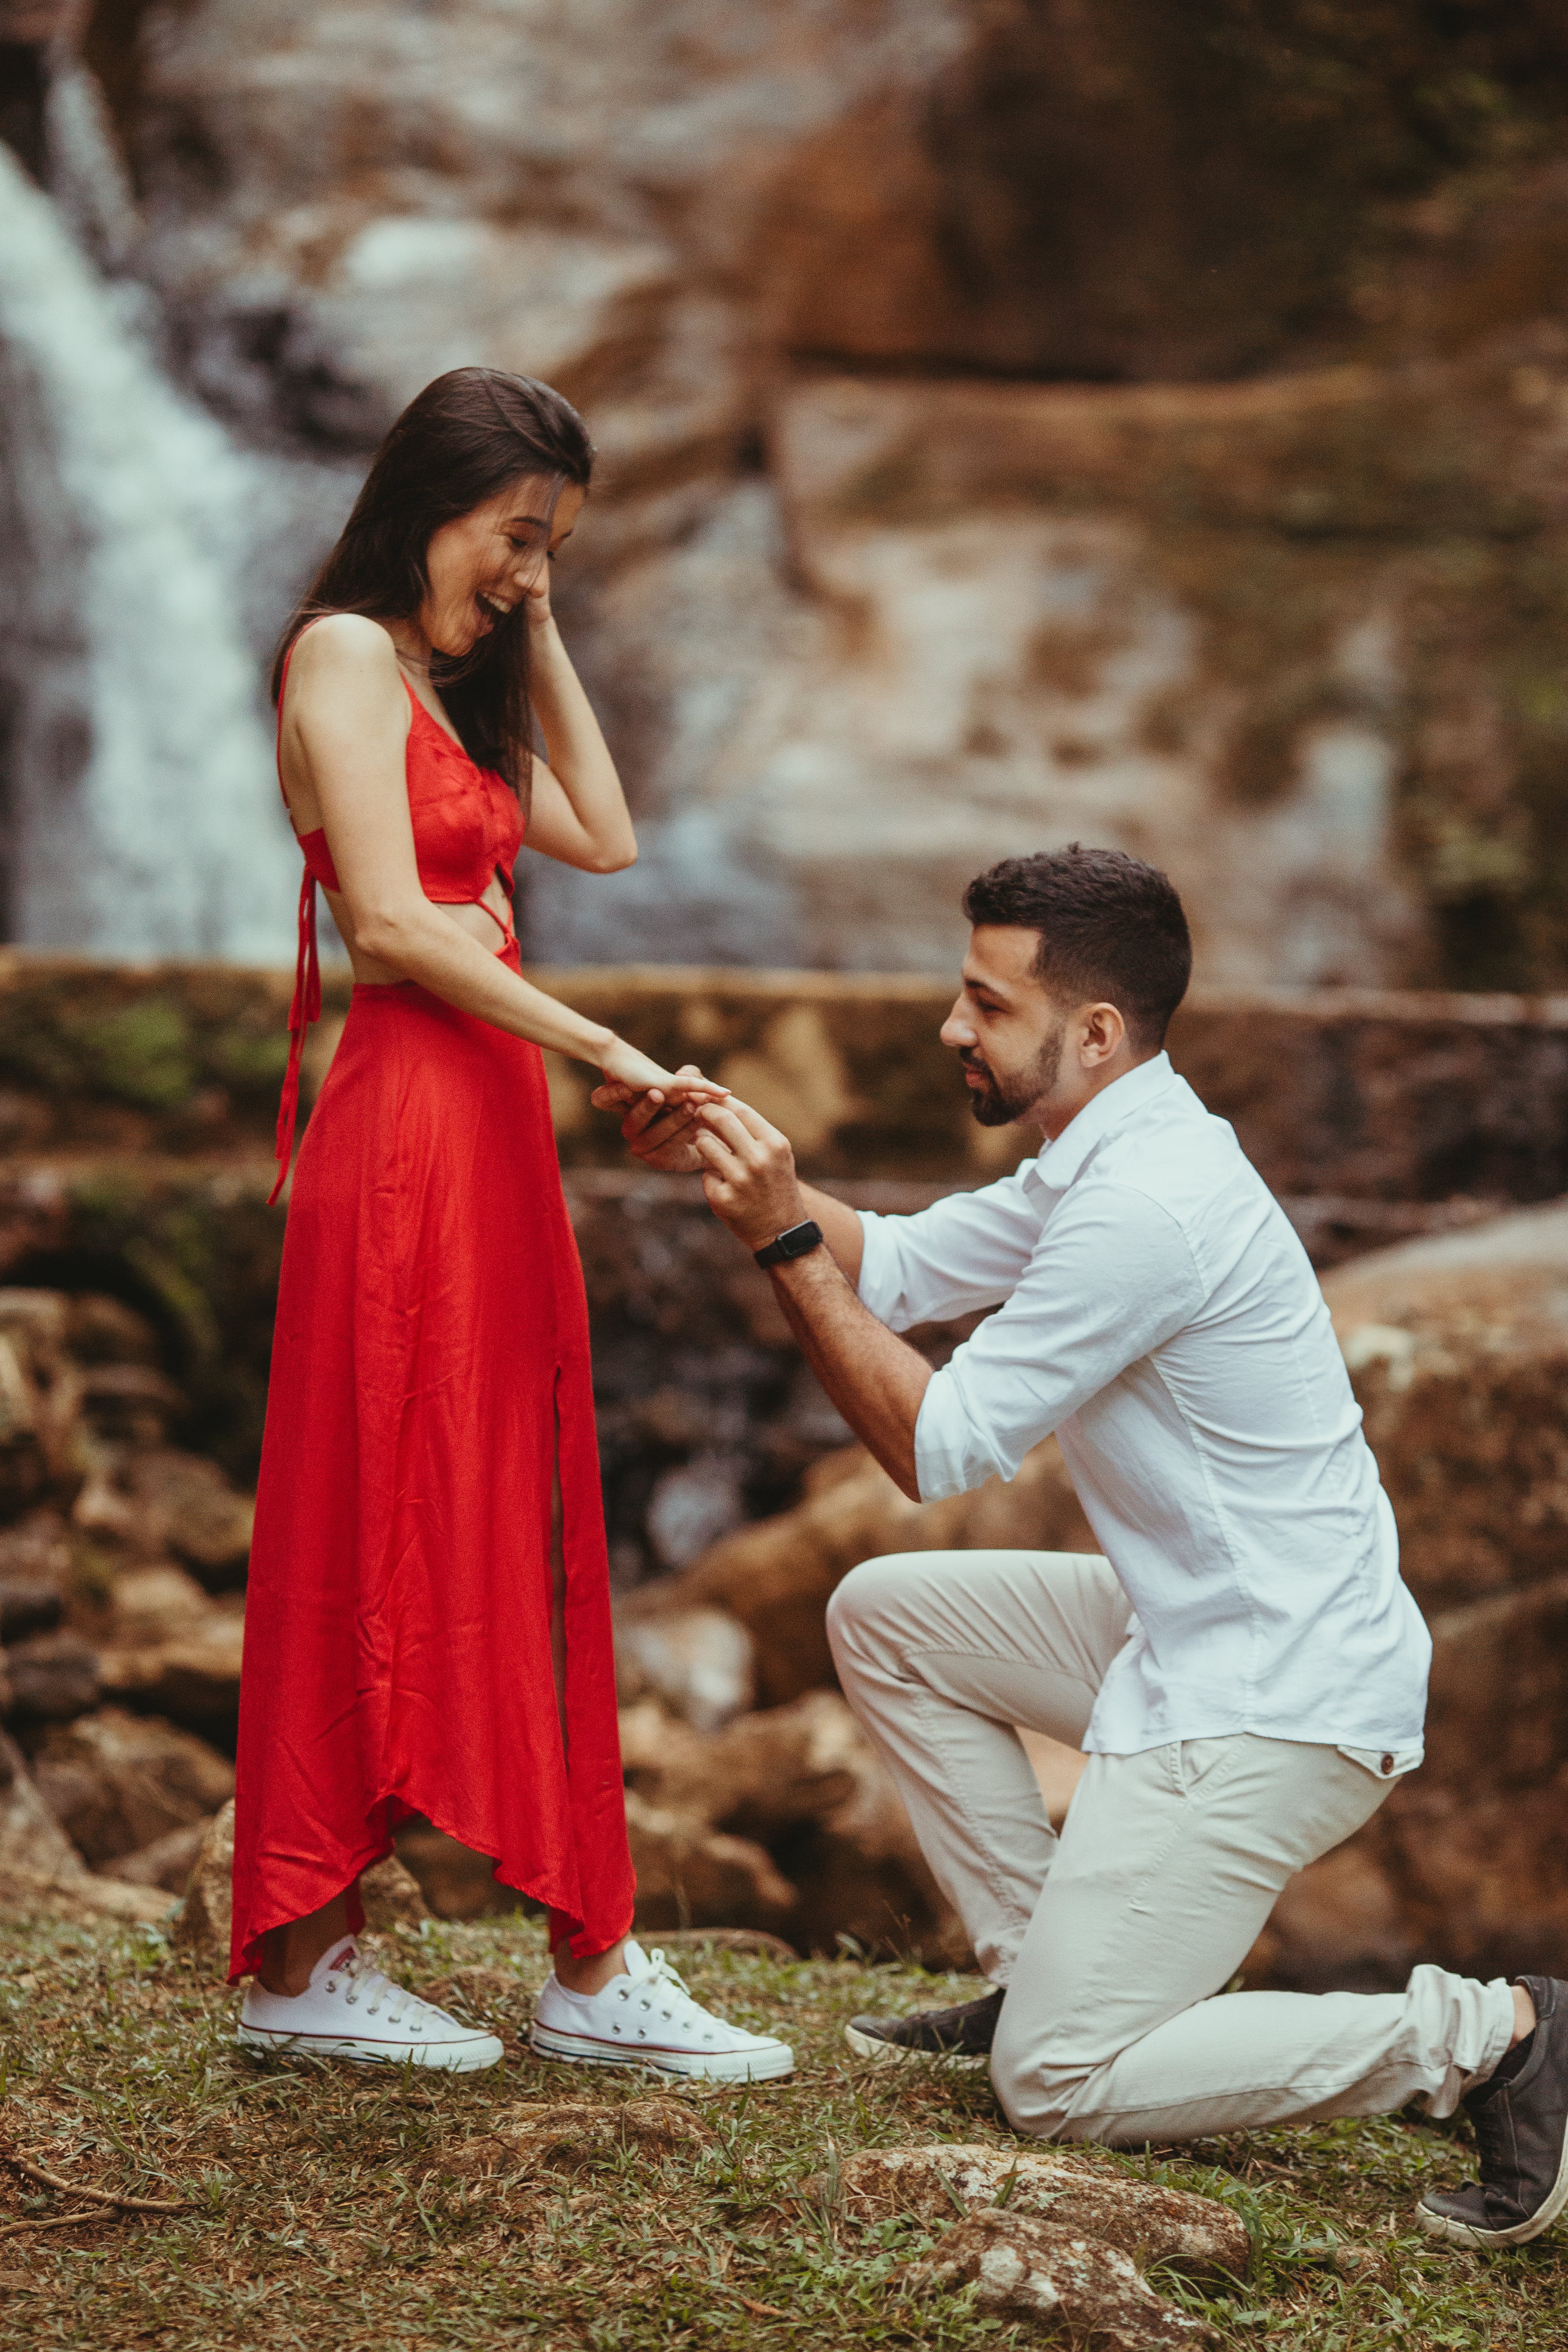 A man kneeling on one knee while proposing to his partner outdoors | Source: Pexels